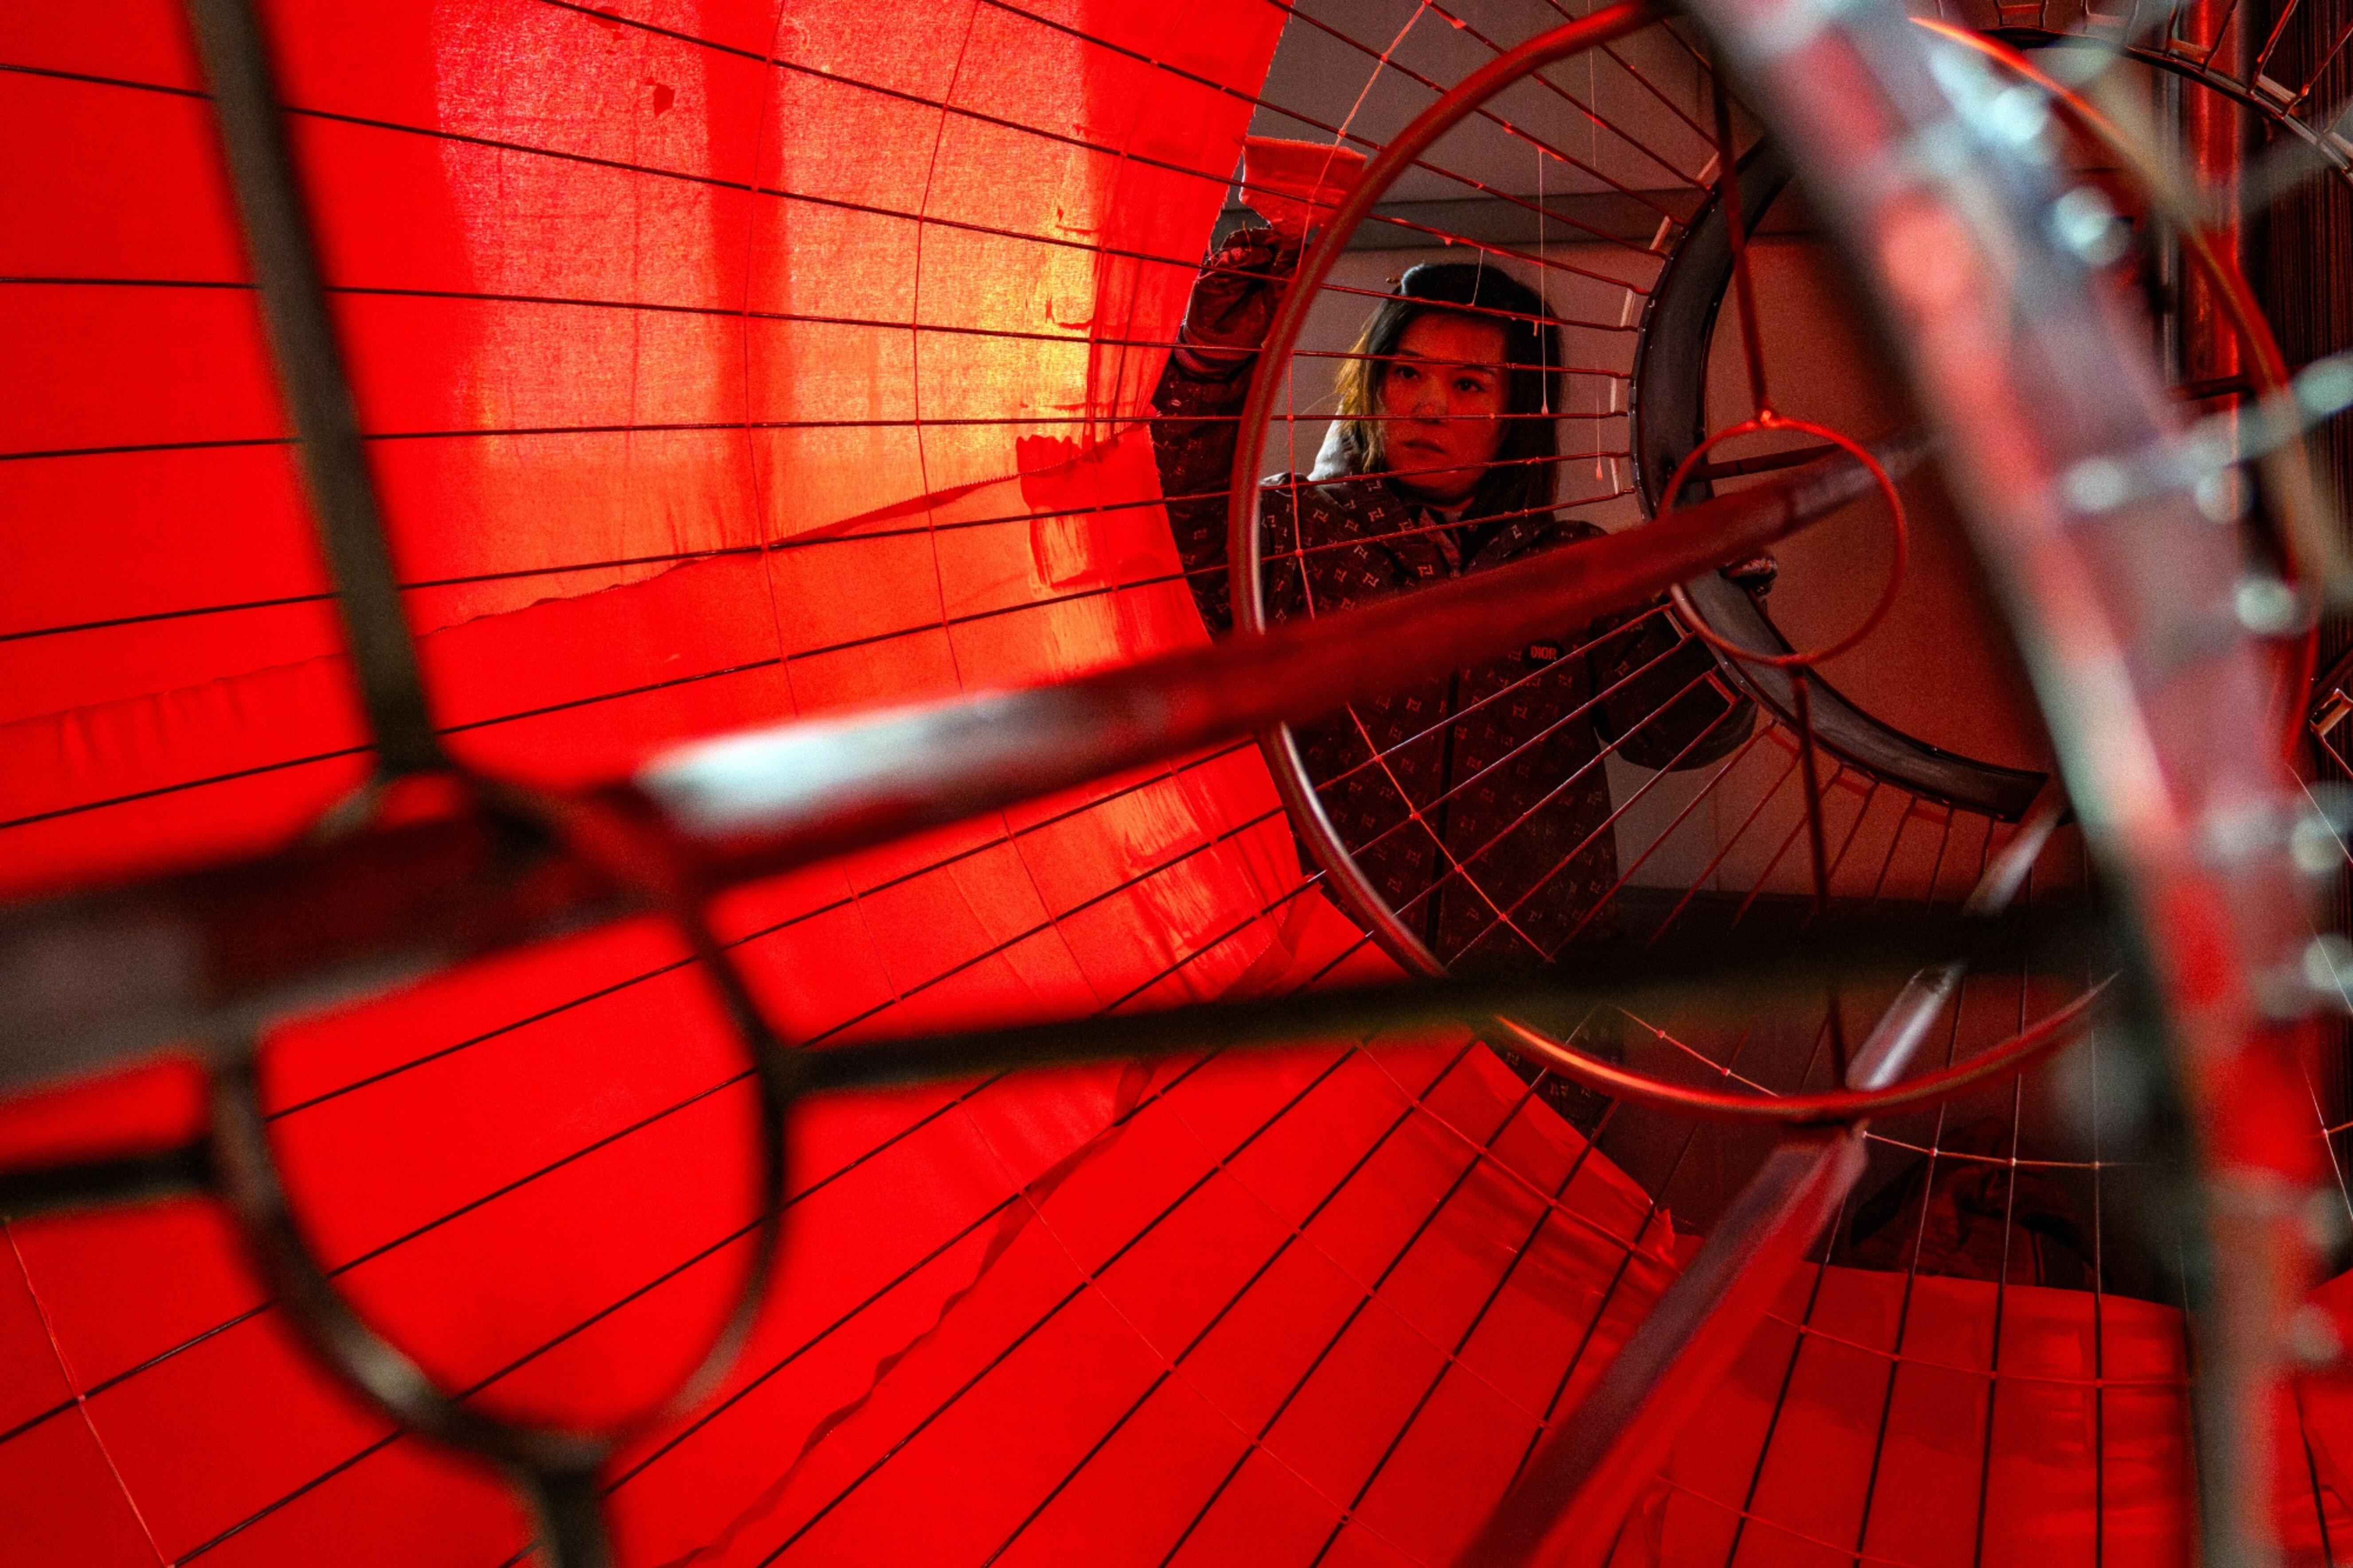 A worker assembles a traditional Chinese lantern at a factory in the village of Tuntou near Shijiazhuang, North China’s Hebei province. Photo: Bloomberg